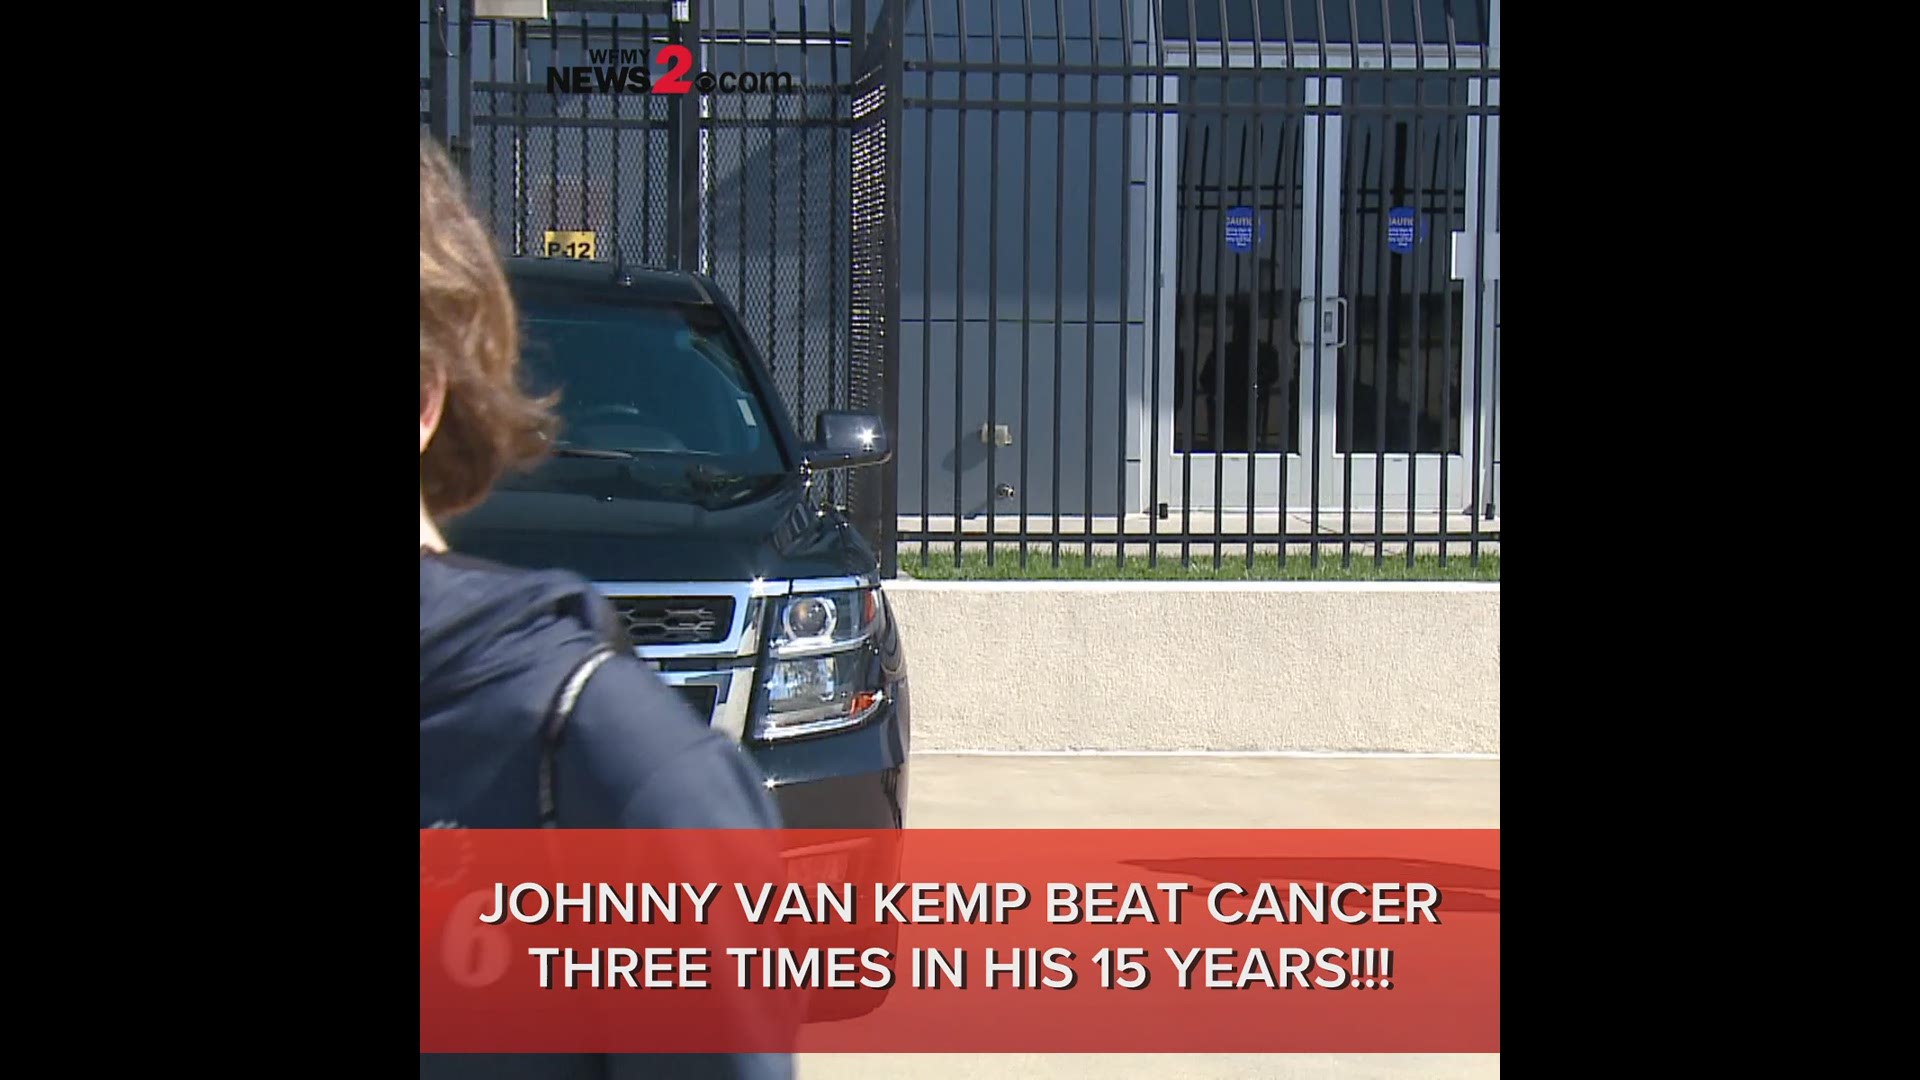 After 7 years and 3 different cancer diagnoses, 15-year-old, Johnny Van Kemp is hoping that he has finally defeated cancer once and for all.